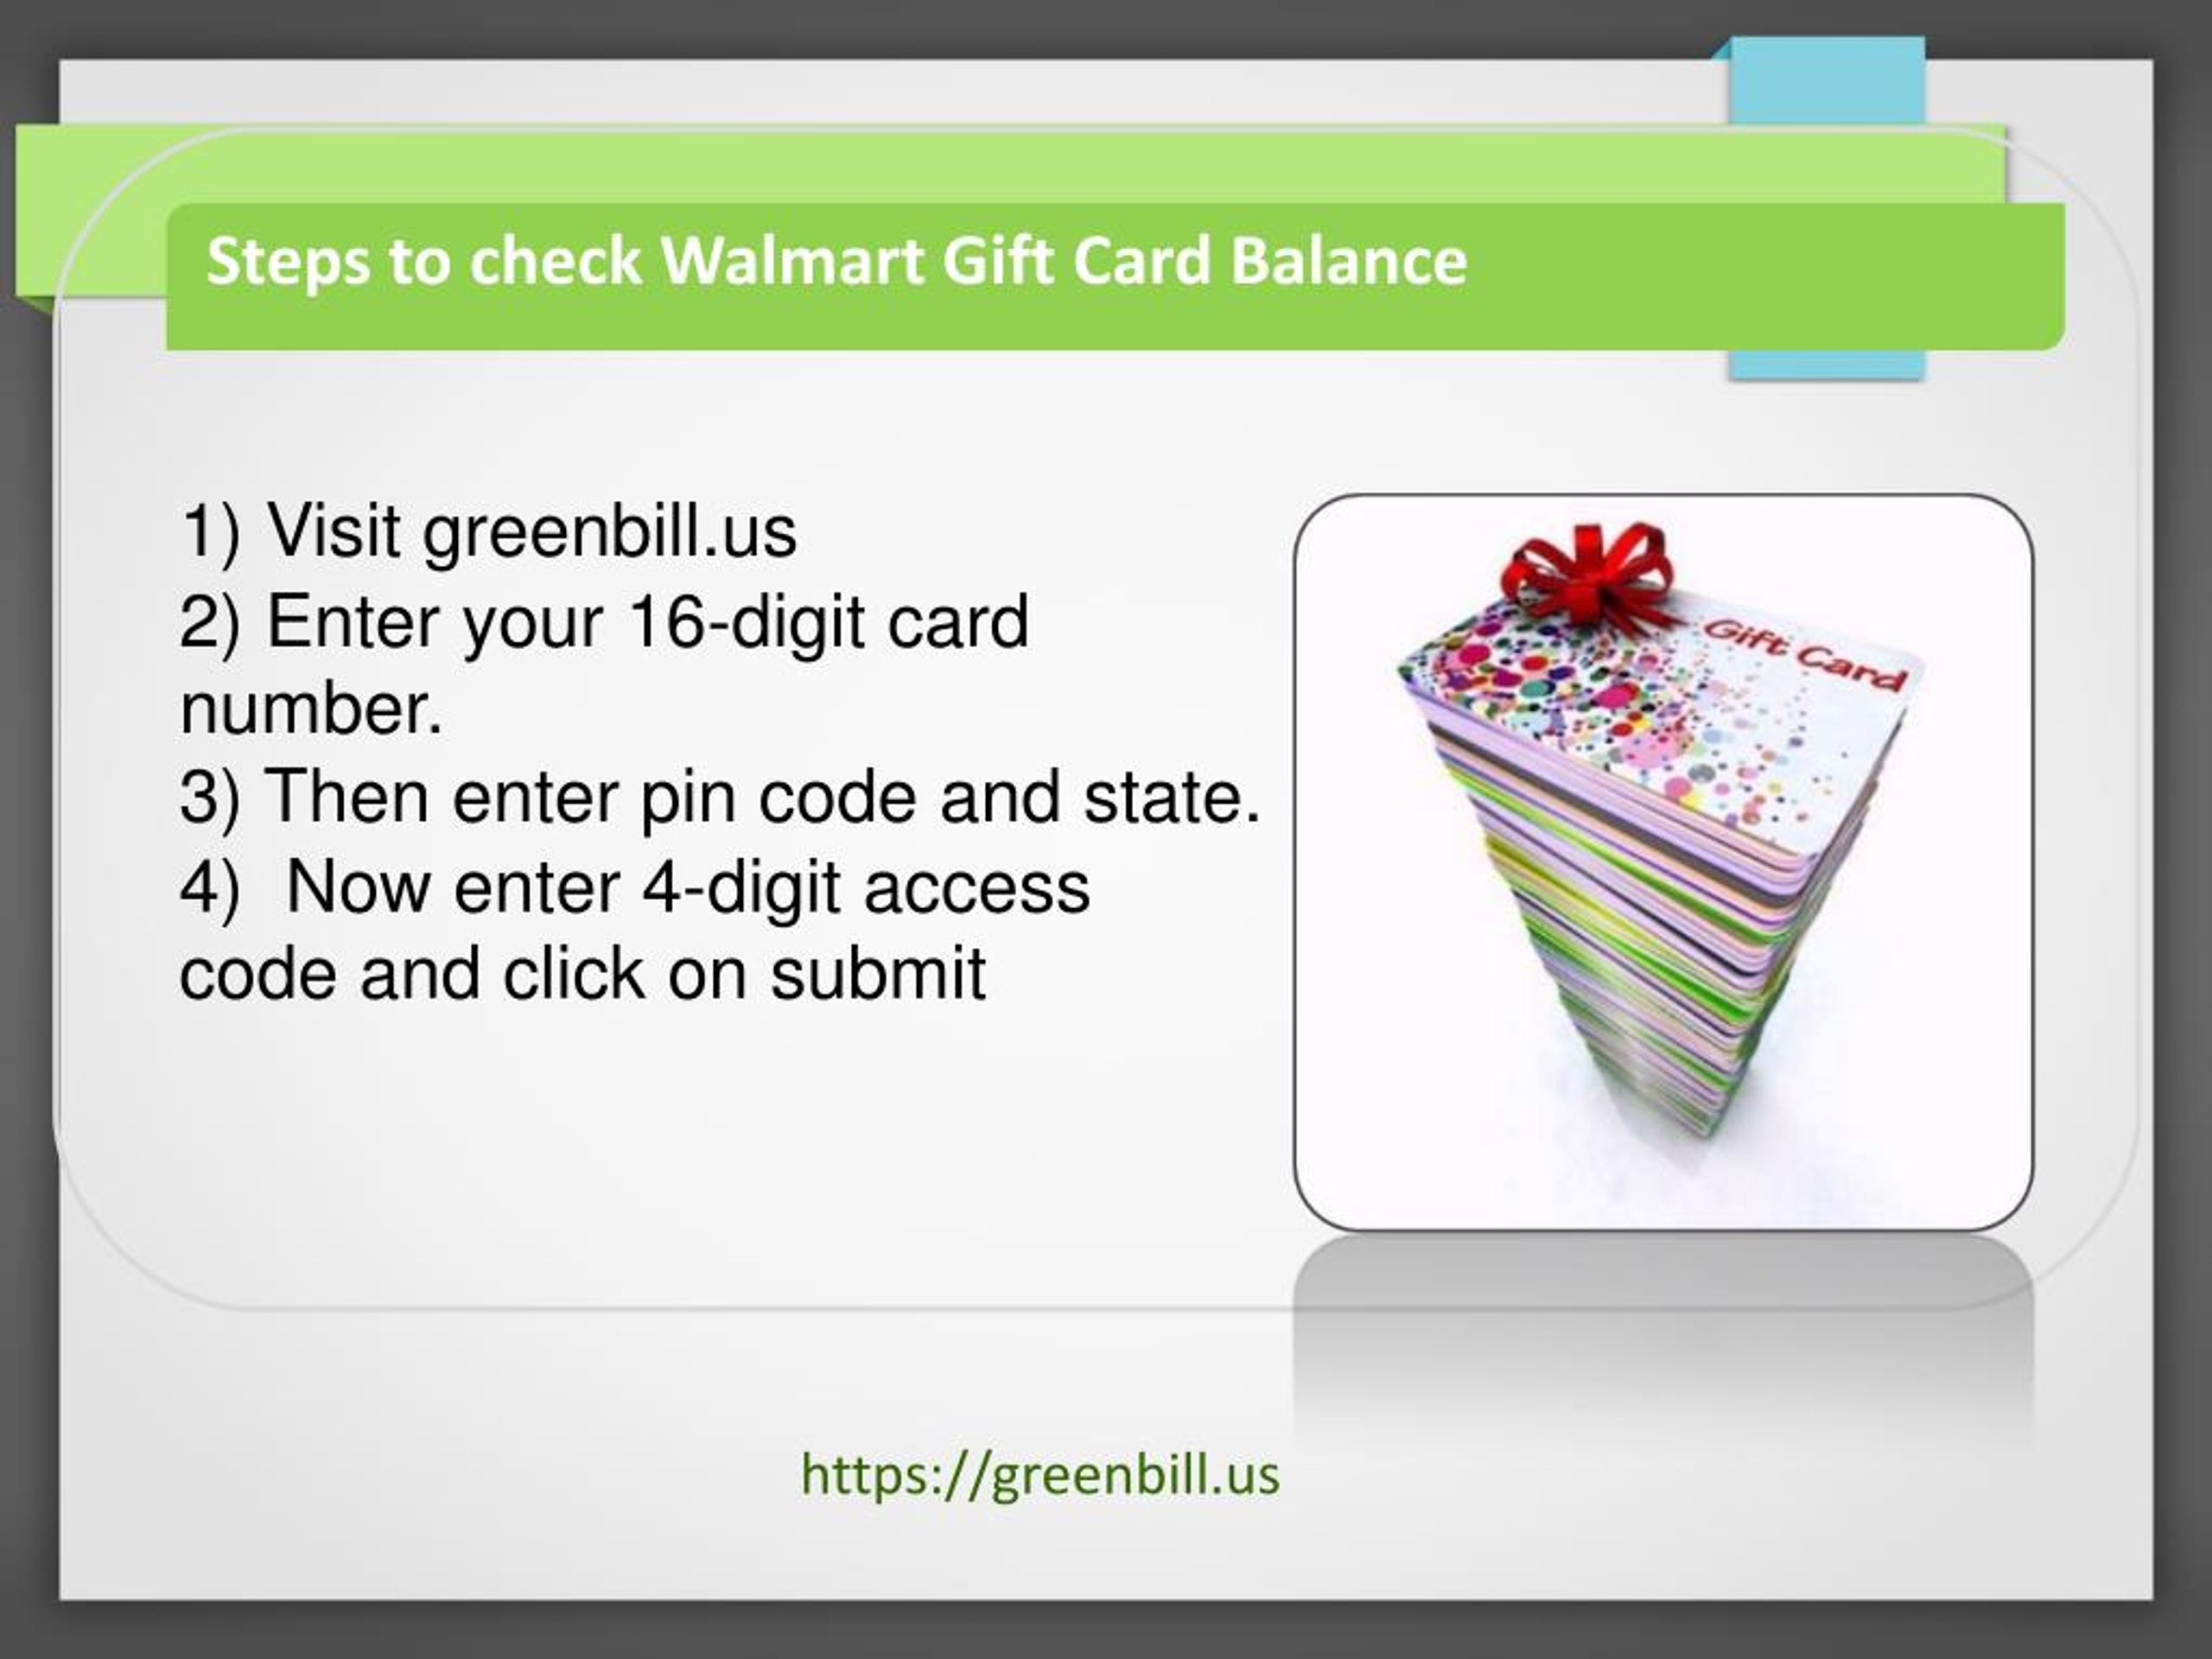 how to check walmart gift card balance without pin